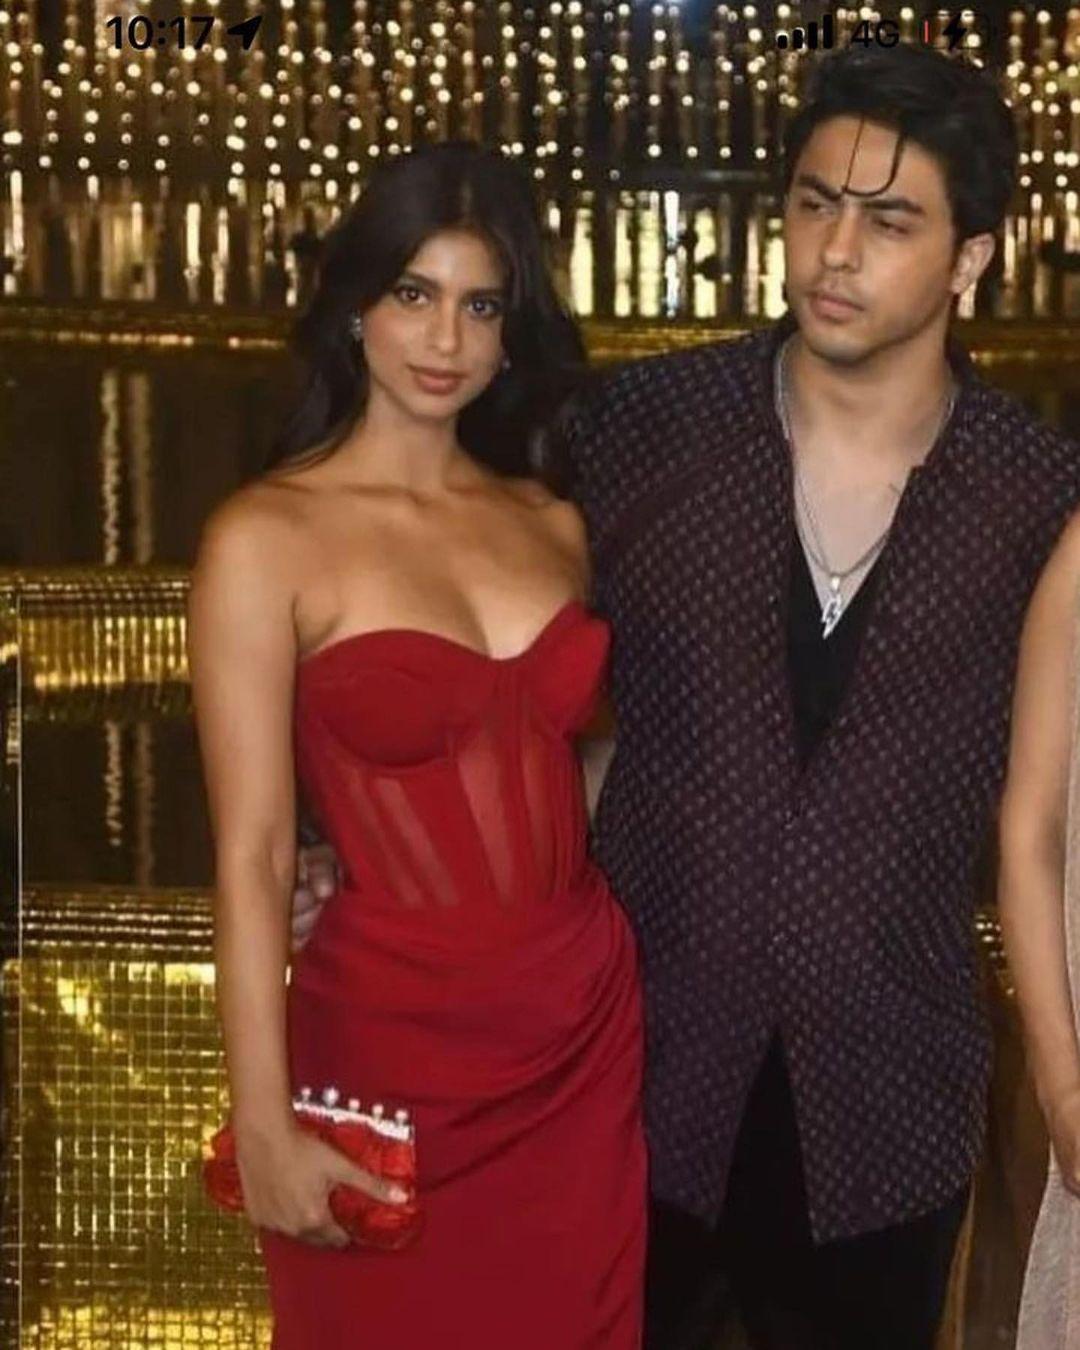 The whole internet went gaga over this gown and how good Suhana looked. The post immediately earned her hundreds and thousands of likes instantly